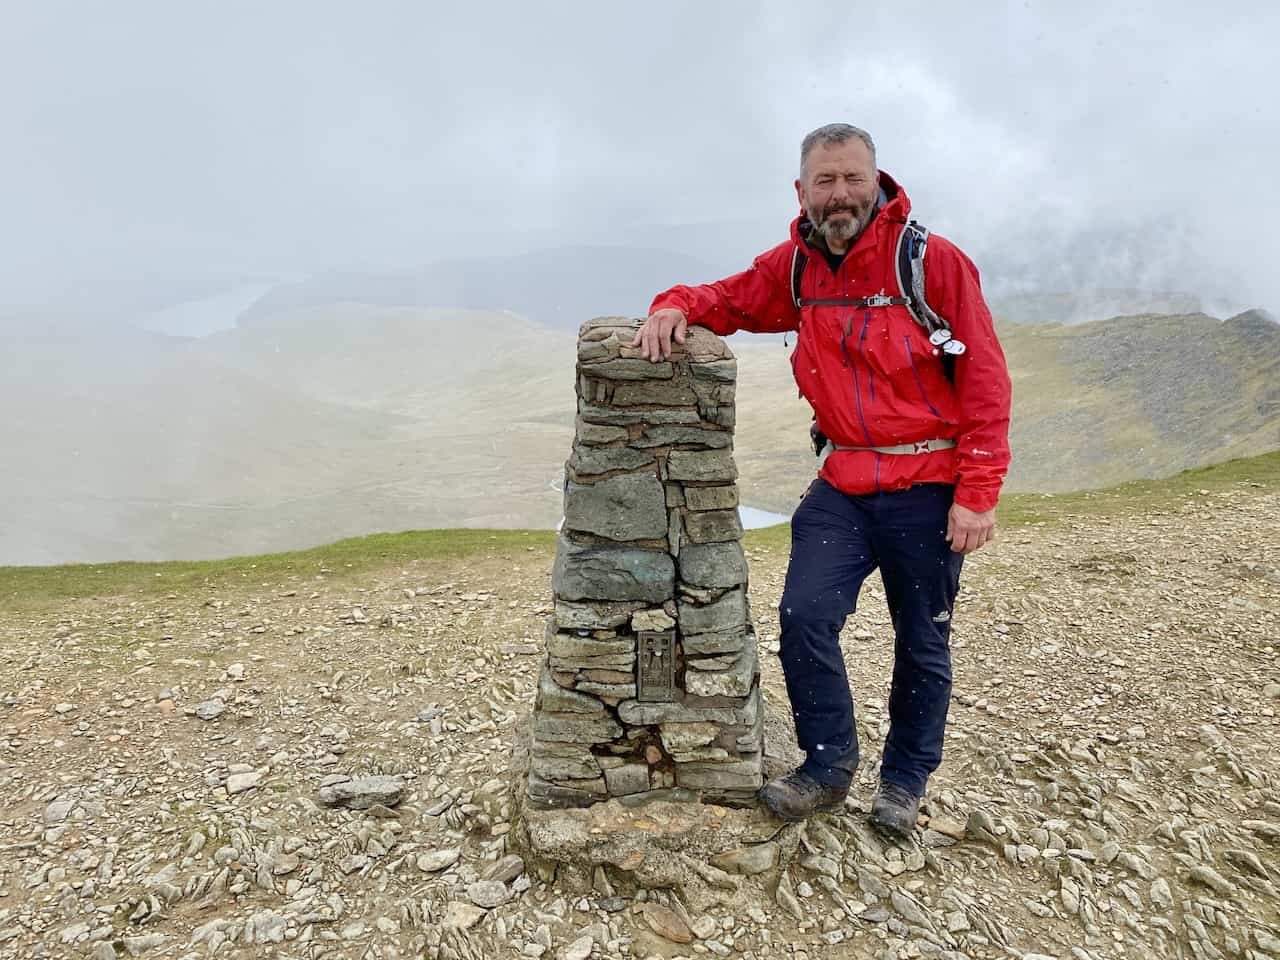 Triangulation pillar on Helvellyn, height 949 metres (3114 feet). Helvellyn is the third highest mountain in the Lake District, the two higher ones being Scafell Pike and Scafell.